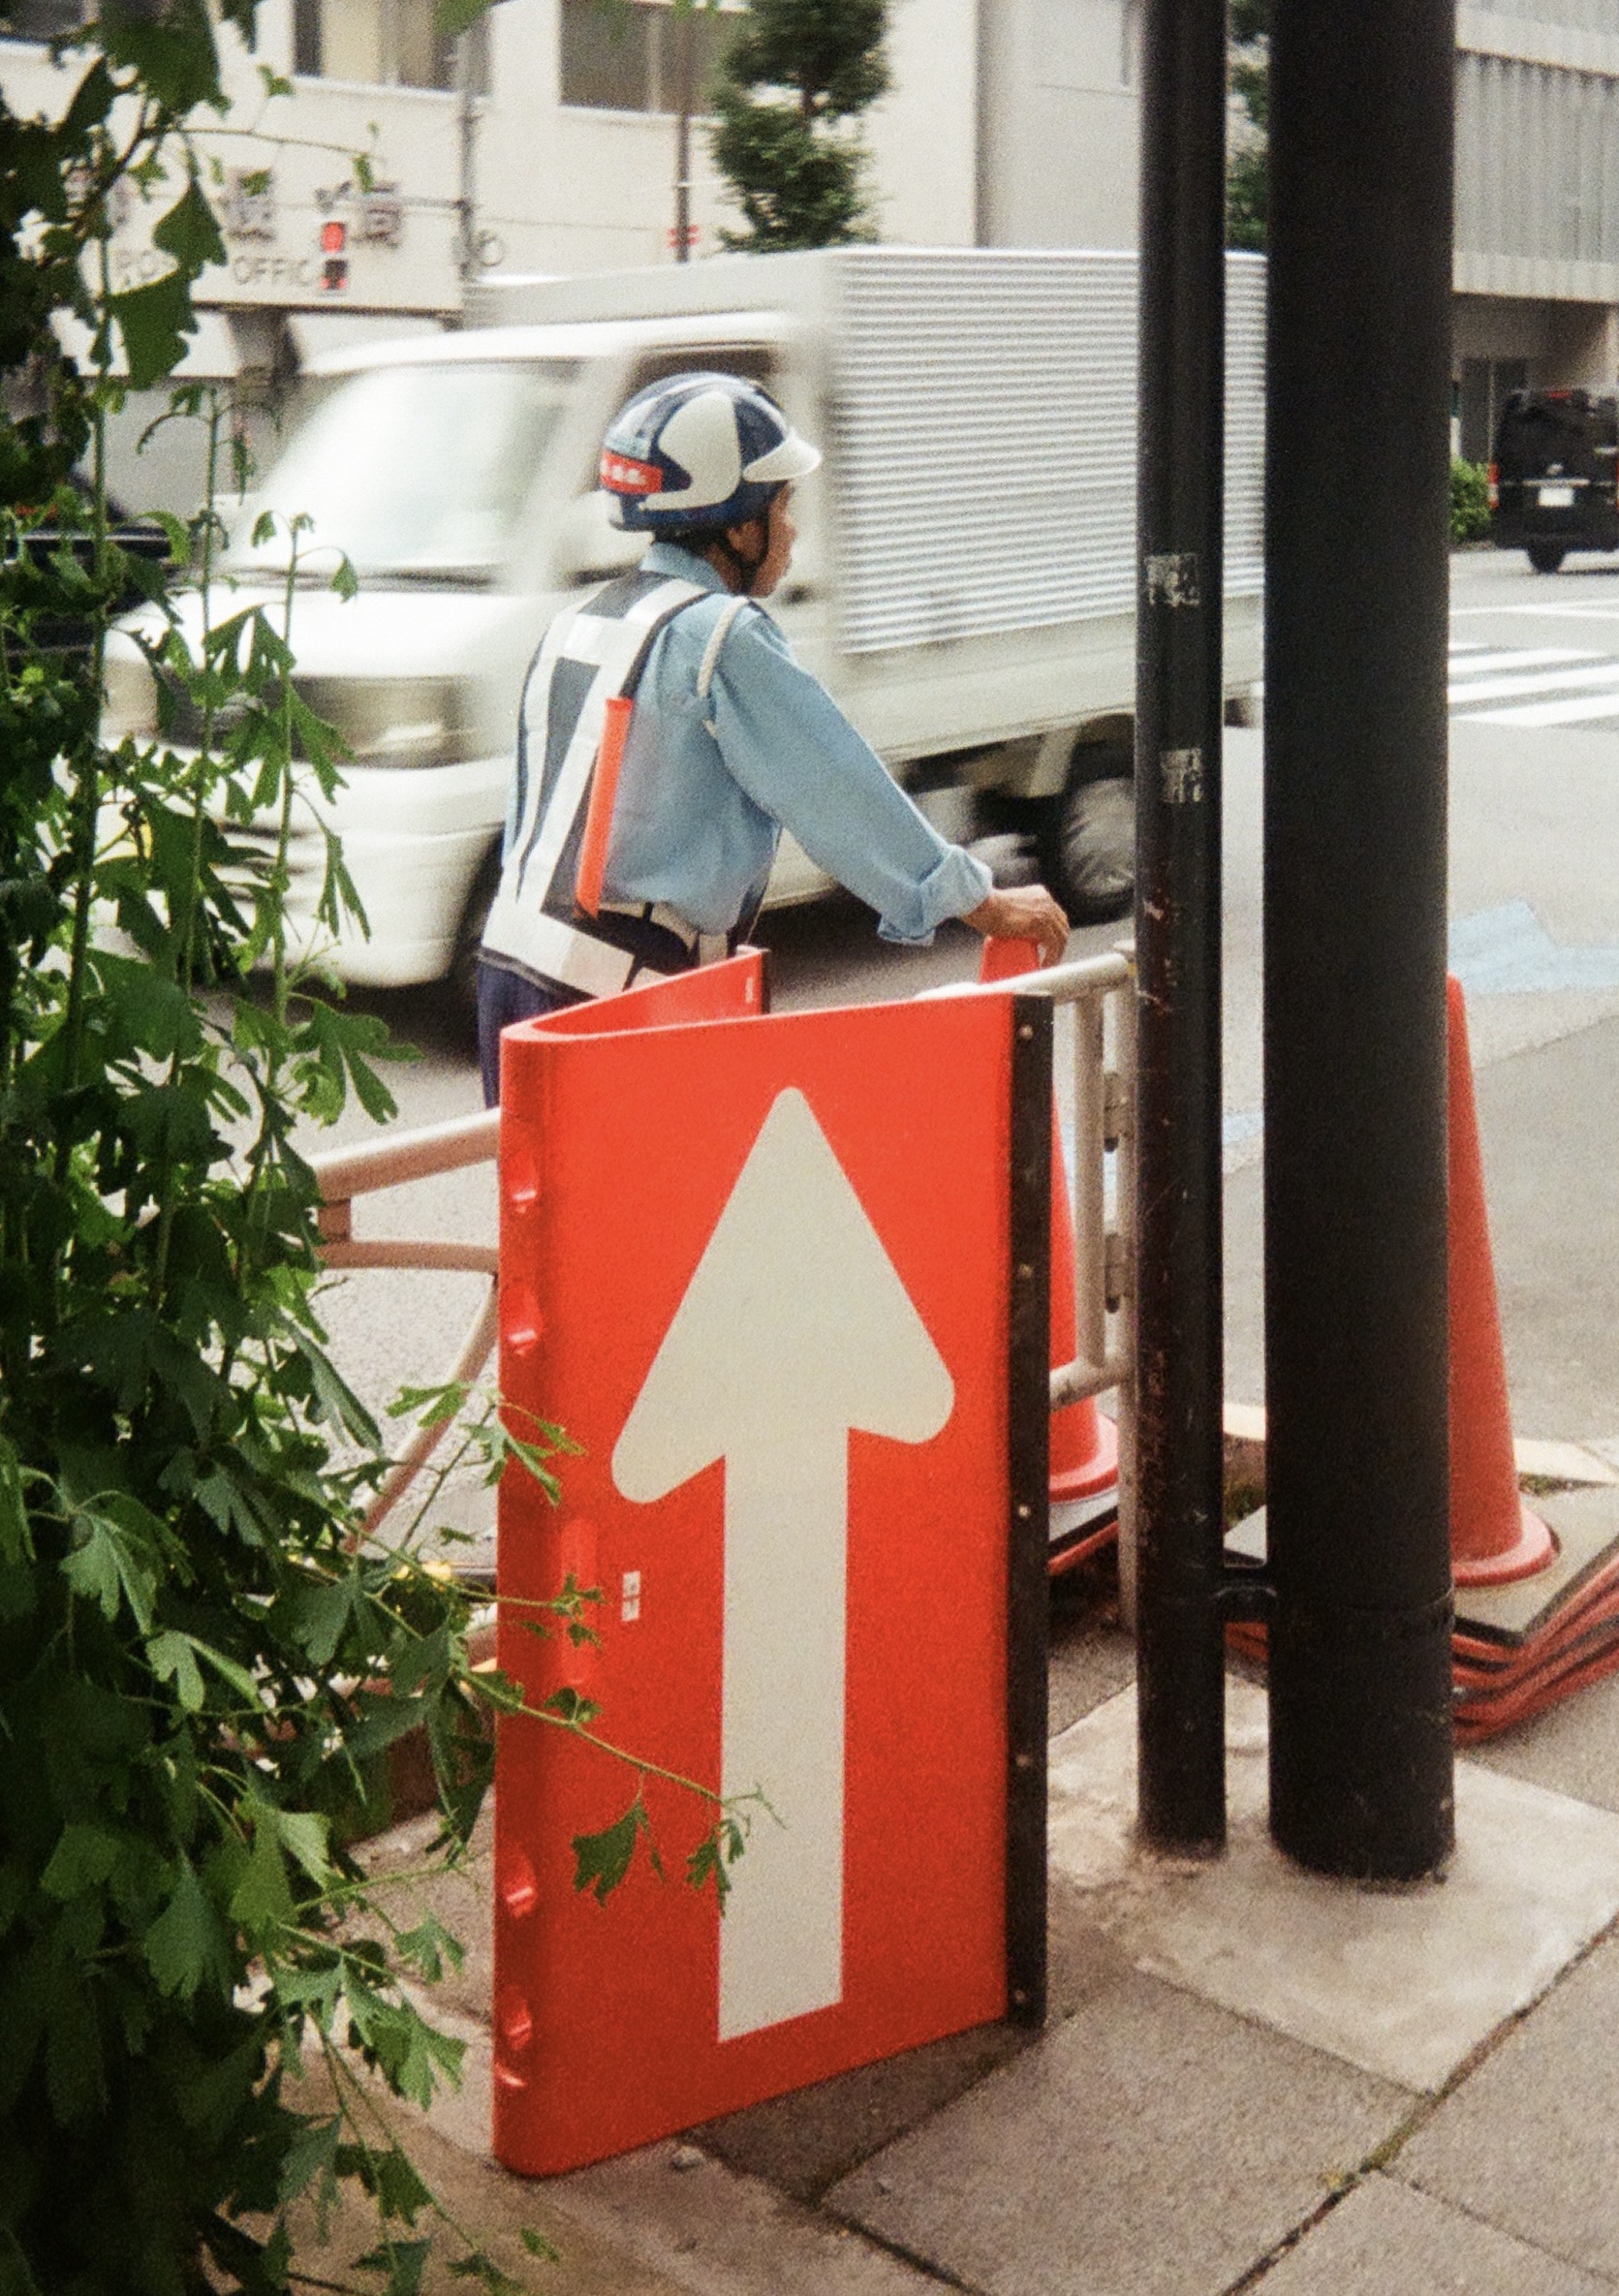 An orange arrow sign pointing up and a person with worker attire